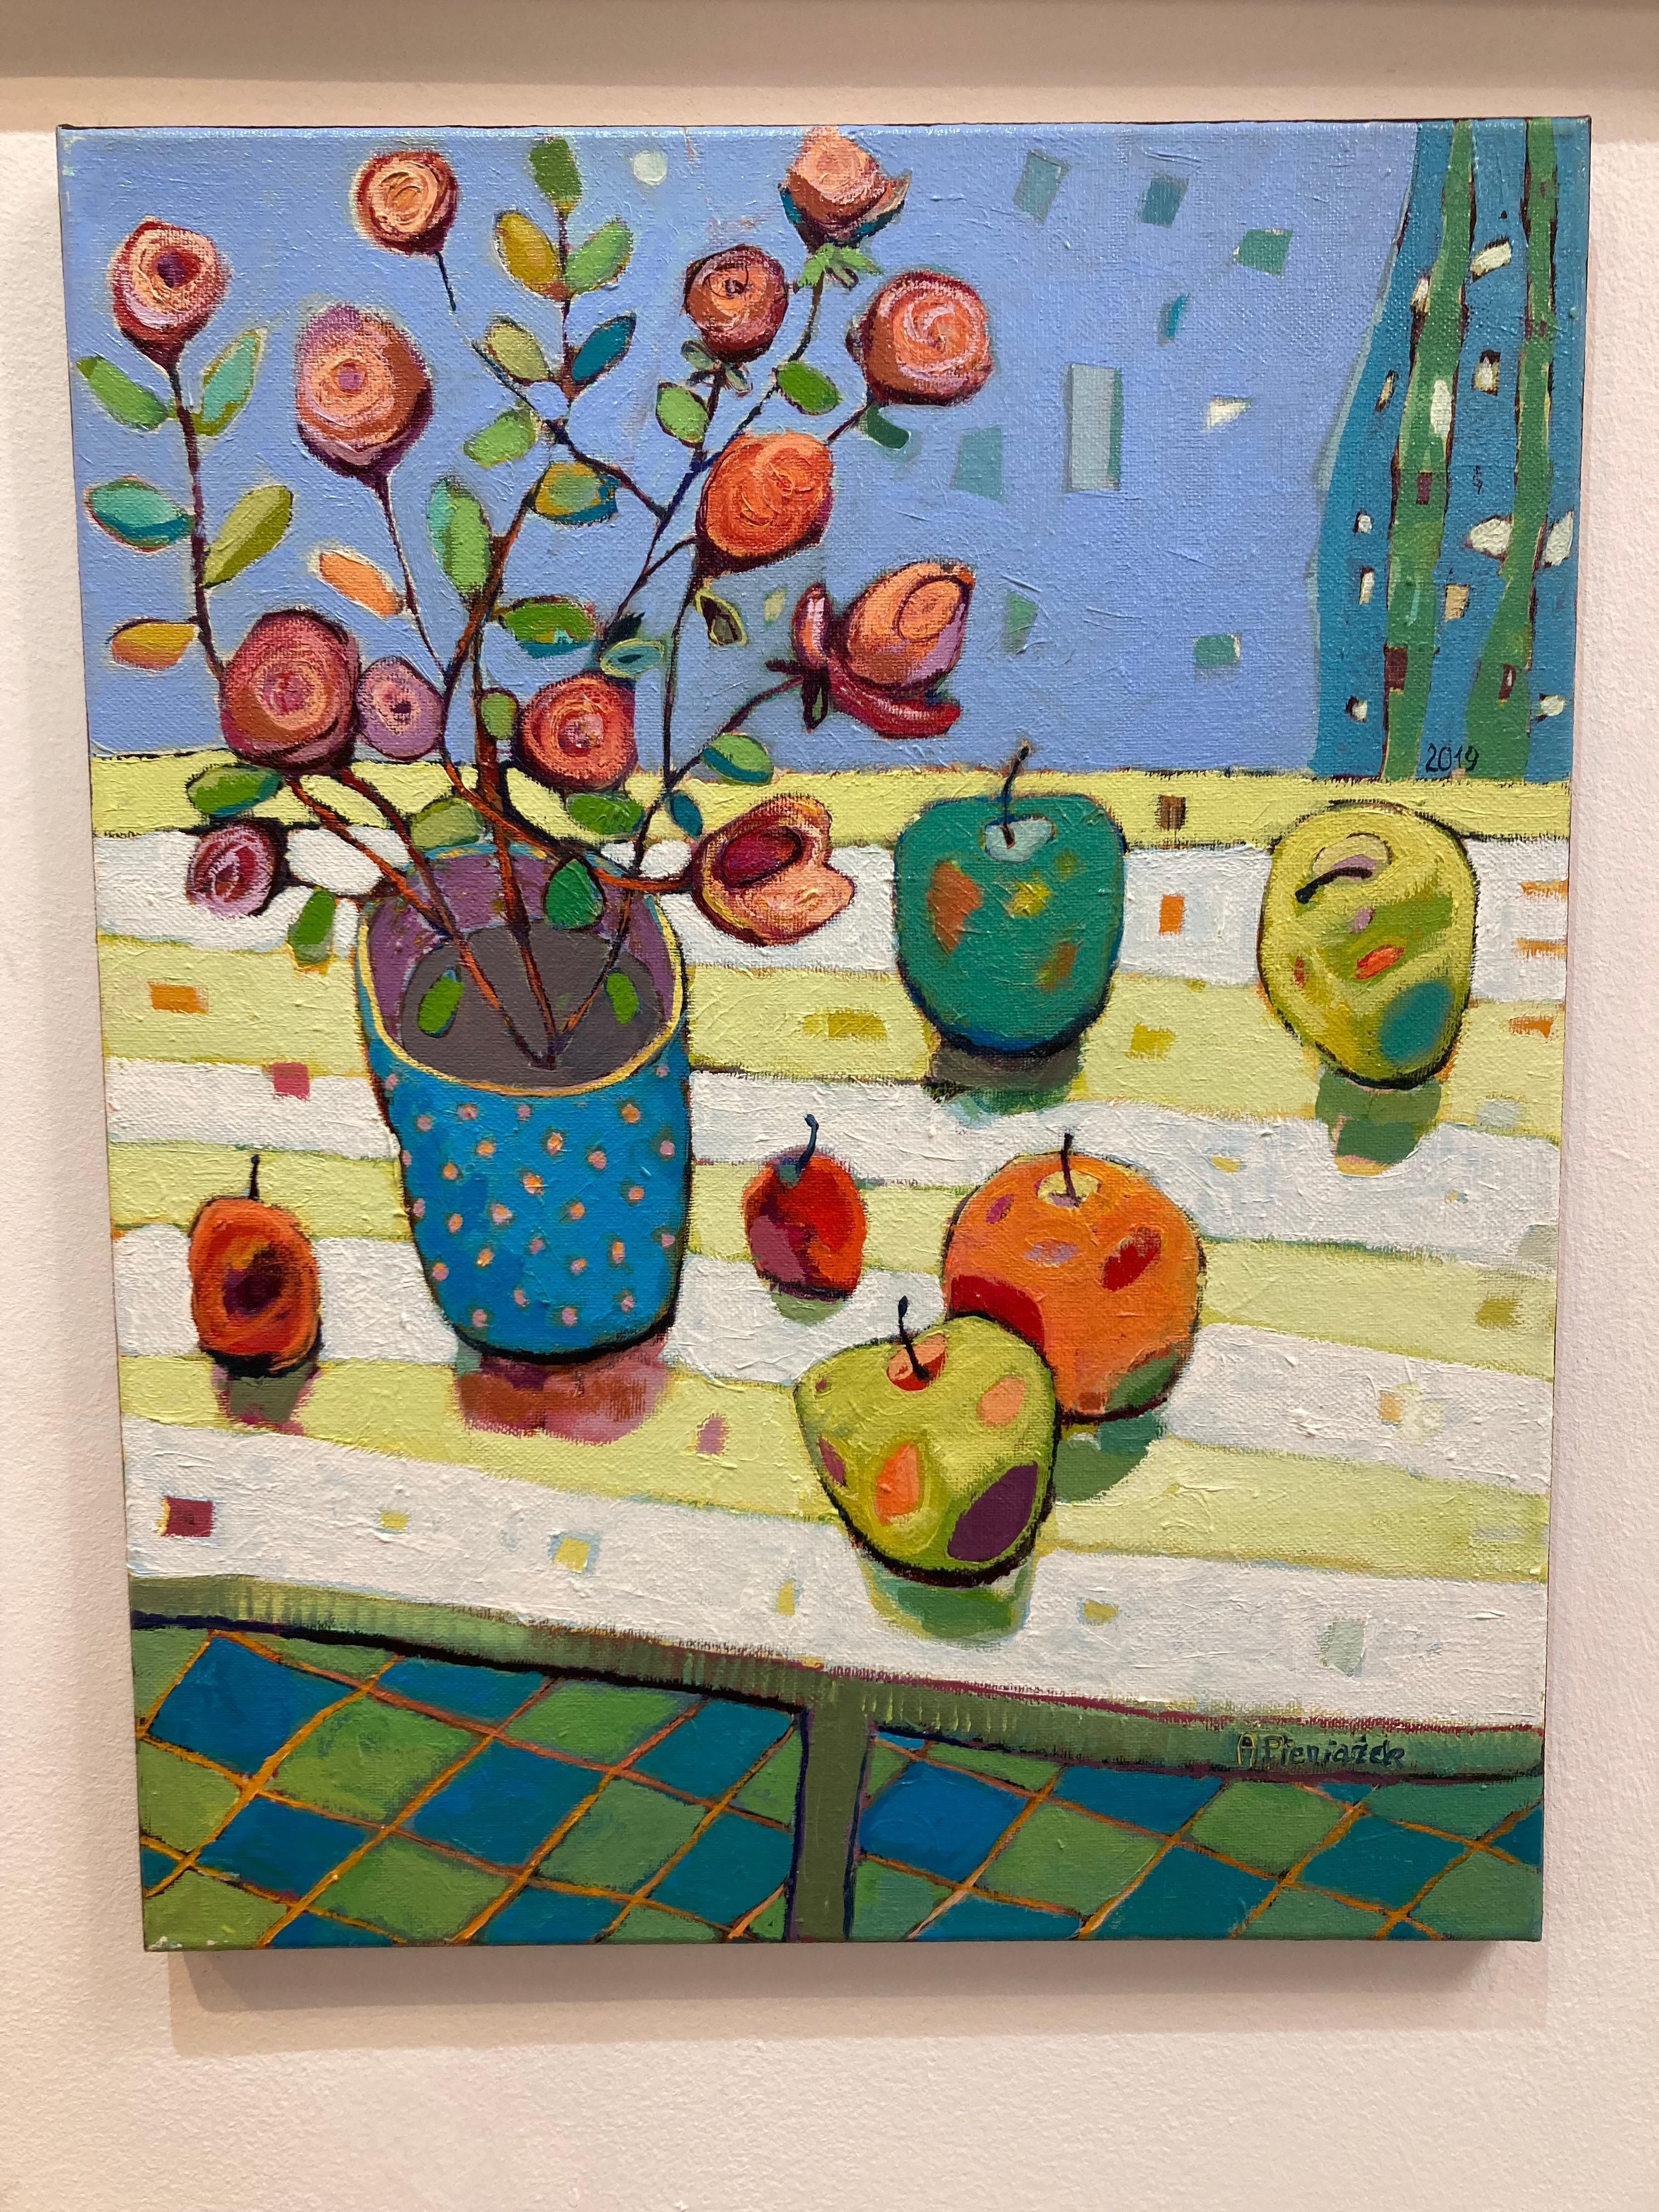 Flower Pot & Apples - Colourful, Patterned Still Life: Acrylic on Canvas  - Painting by Ania Pieniazek